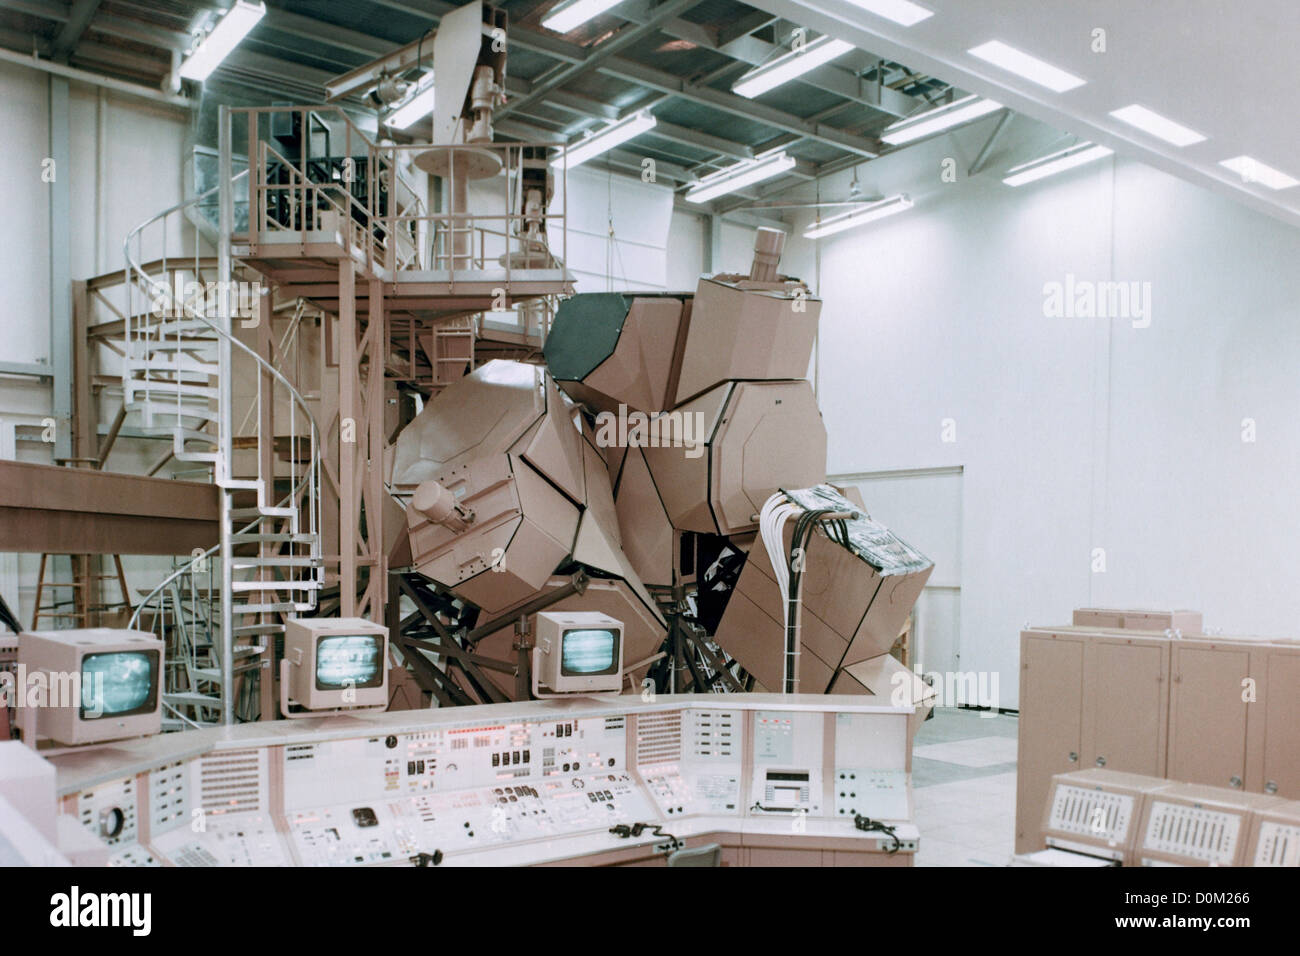 The Apollo Mission Simulator  was fixed base training device capable simulating characteristics space vehicle systems Stock Photo